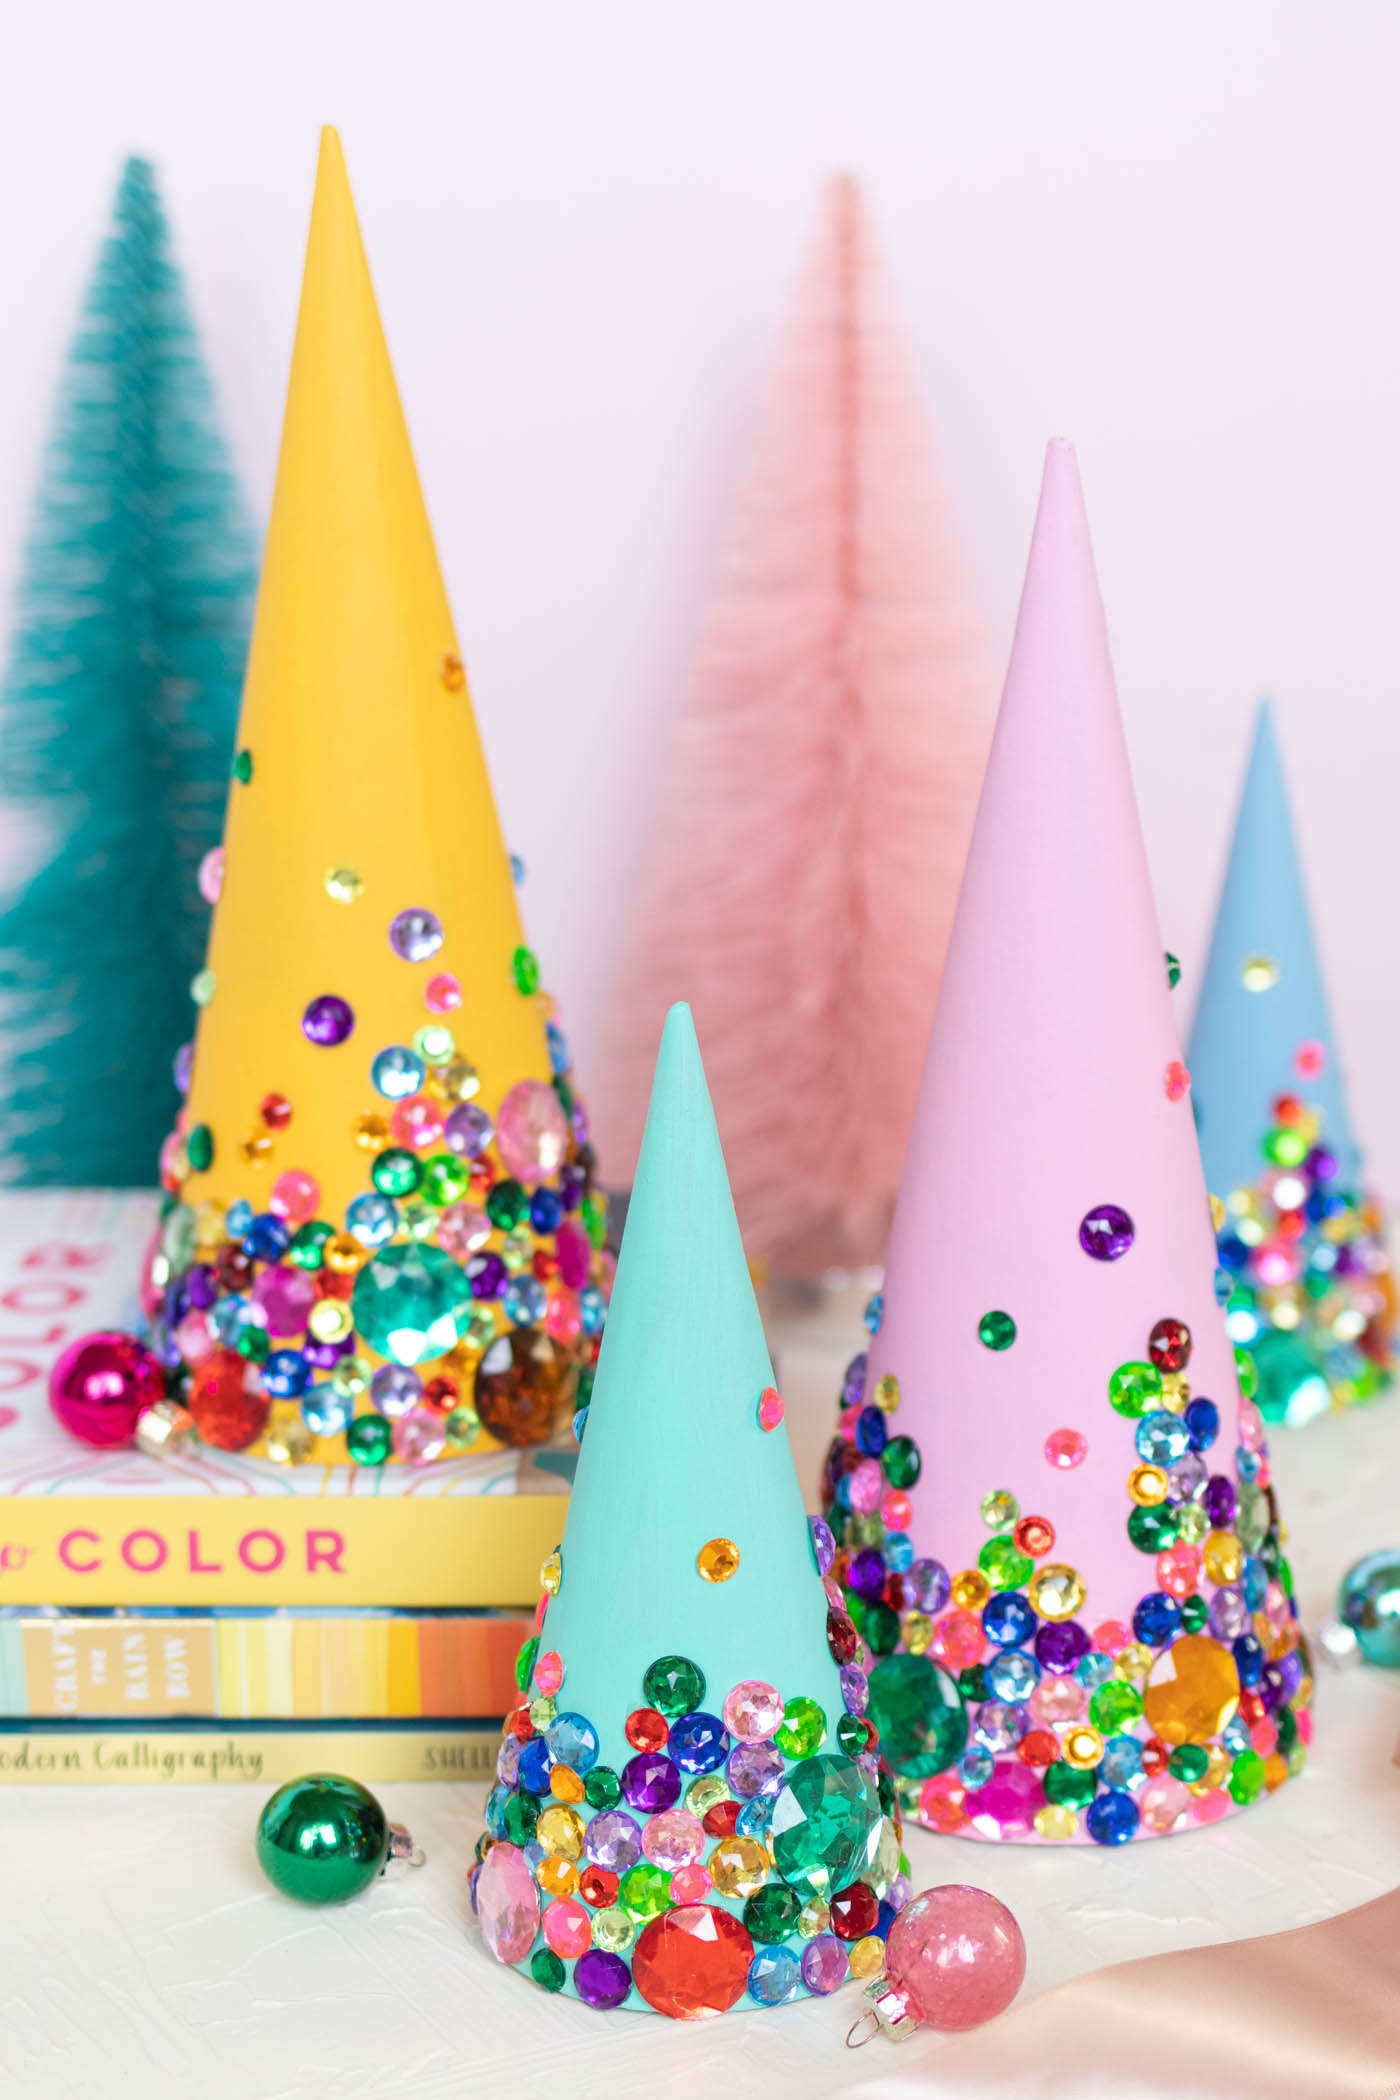 DIY Colorful Rhinestone Tree Decorations // Decorate mache cones with colorful paint and rhinestones to make sparkly tree decorations! These easy DIY Christmas trees make great mantel decor or shelf accessories for the holiday season! #christmasdiy #christmas #christmasdecor #painting #rhinestones #holidaydecor